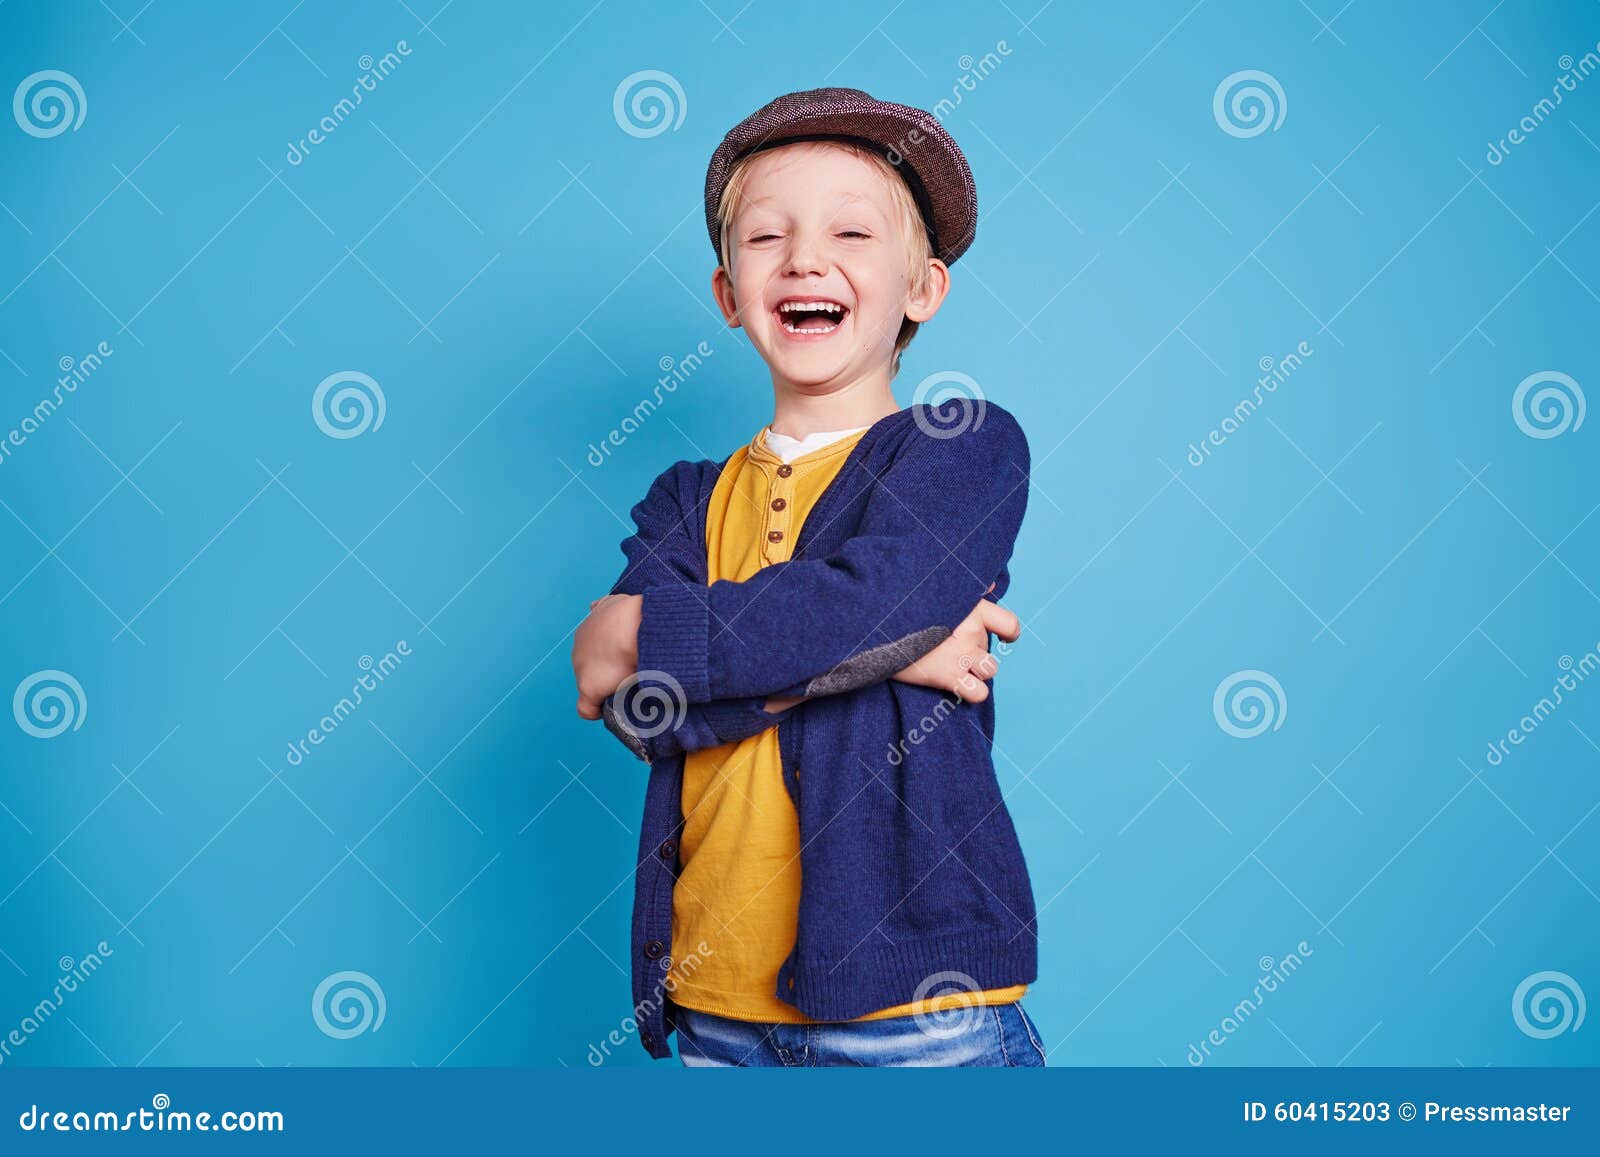 Ecstatic kid stock image. Image of handsome, satisfied - 60415203